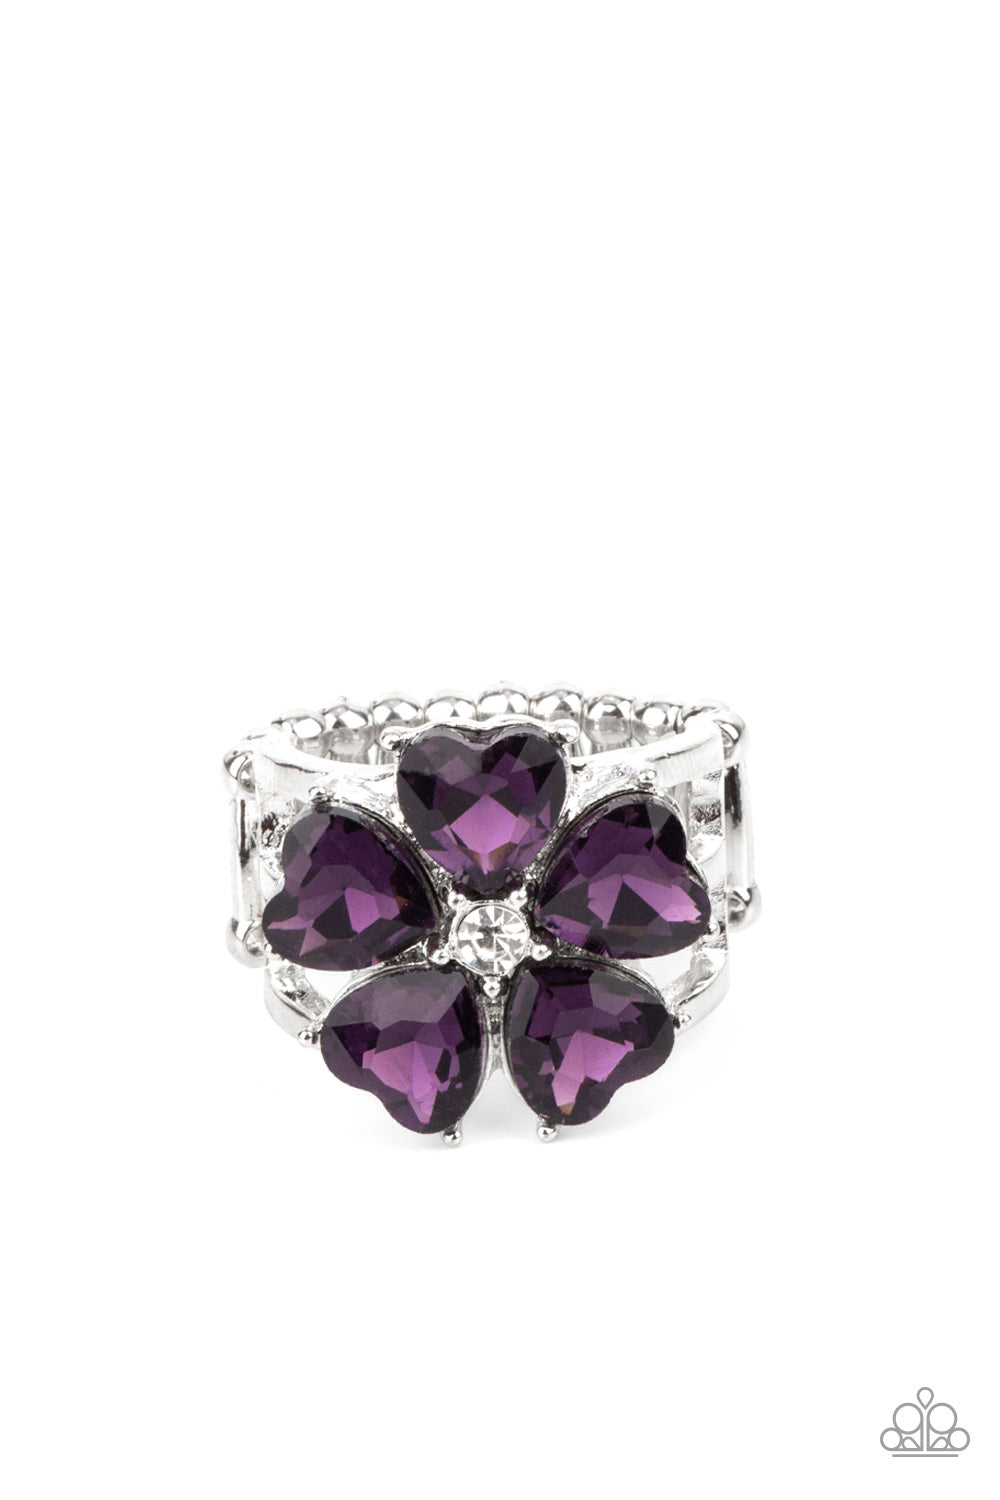 Minnesota Magic Purple Ring - Paparazzi Accessories  Glittery heart-shaped purple rhinestones bloom from a dainty white rhinestone center, creating a sparkly floral centerpiece atop layered silver bands. Features a stretchy band for a flexible fit.  Sold as one individual ring.